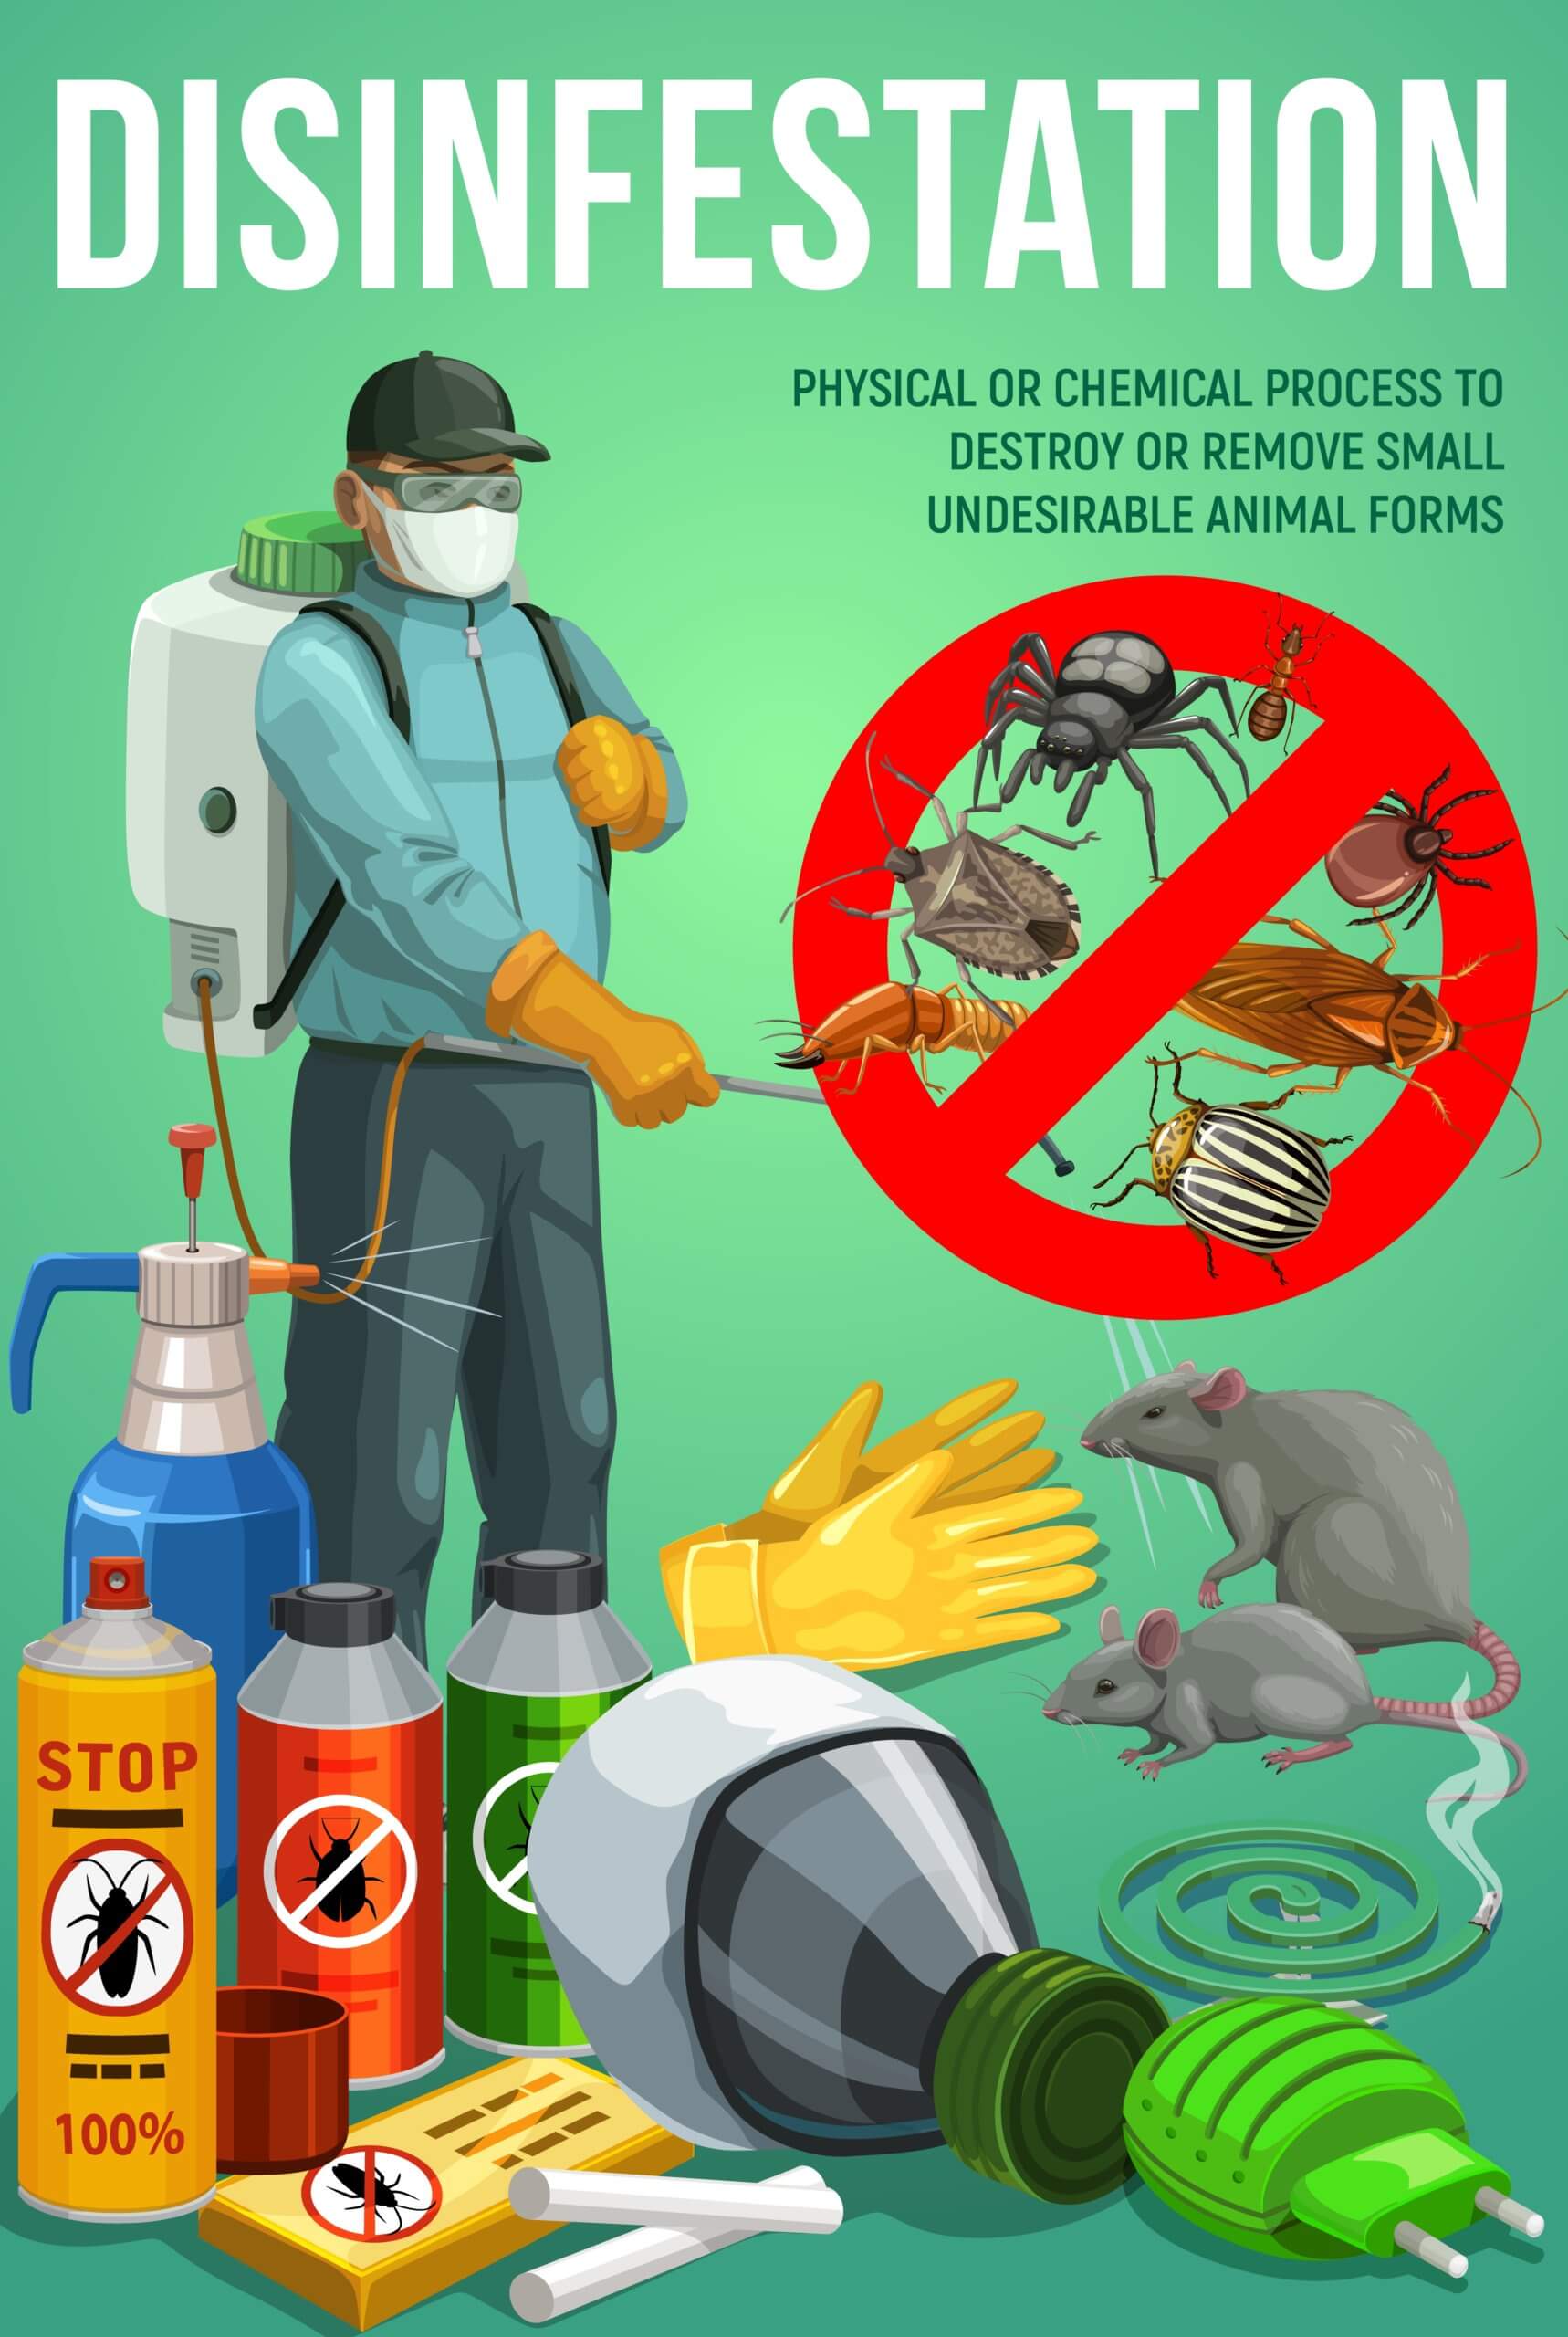 Disinfestation service, pest control, deratization and insects sanitary disinfection vector poster. Pest control rats and mice extermination, domestic insects, bugs and parasites chemical fumigation